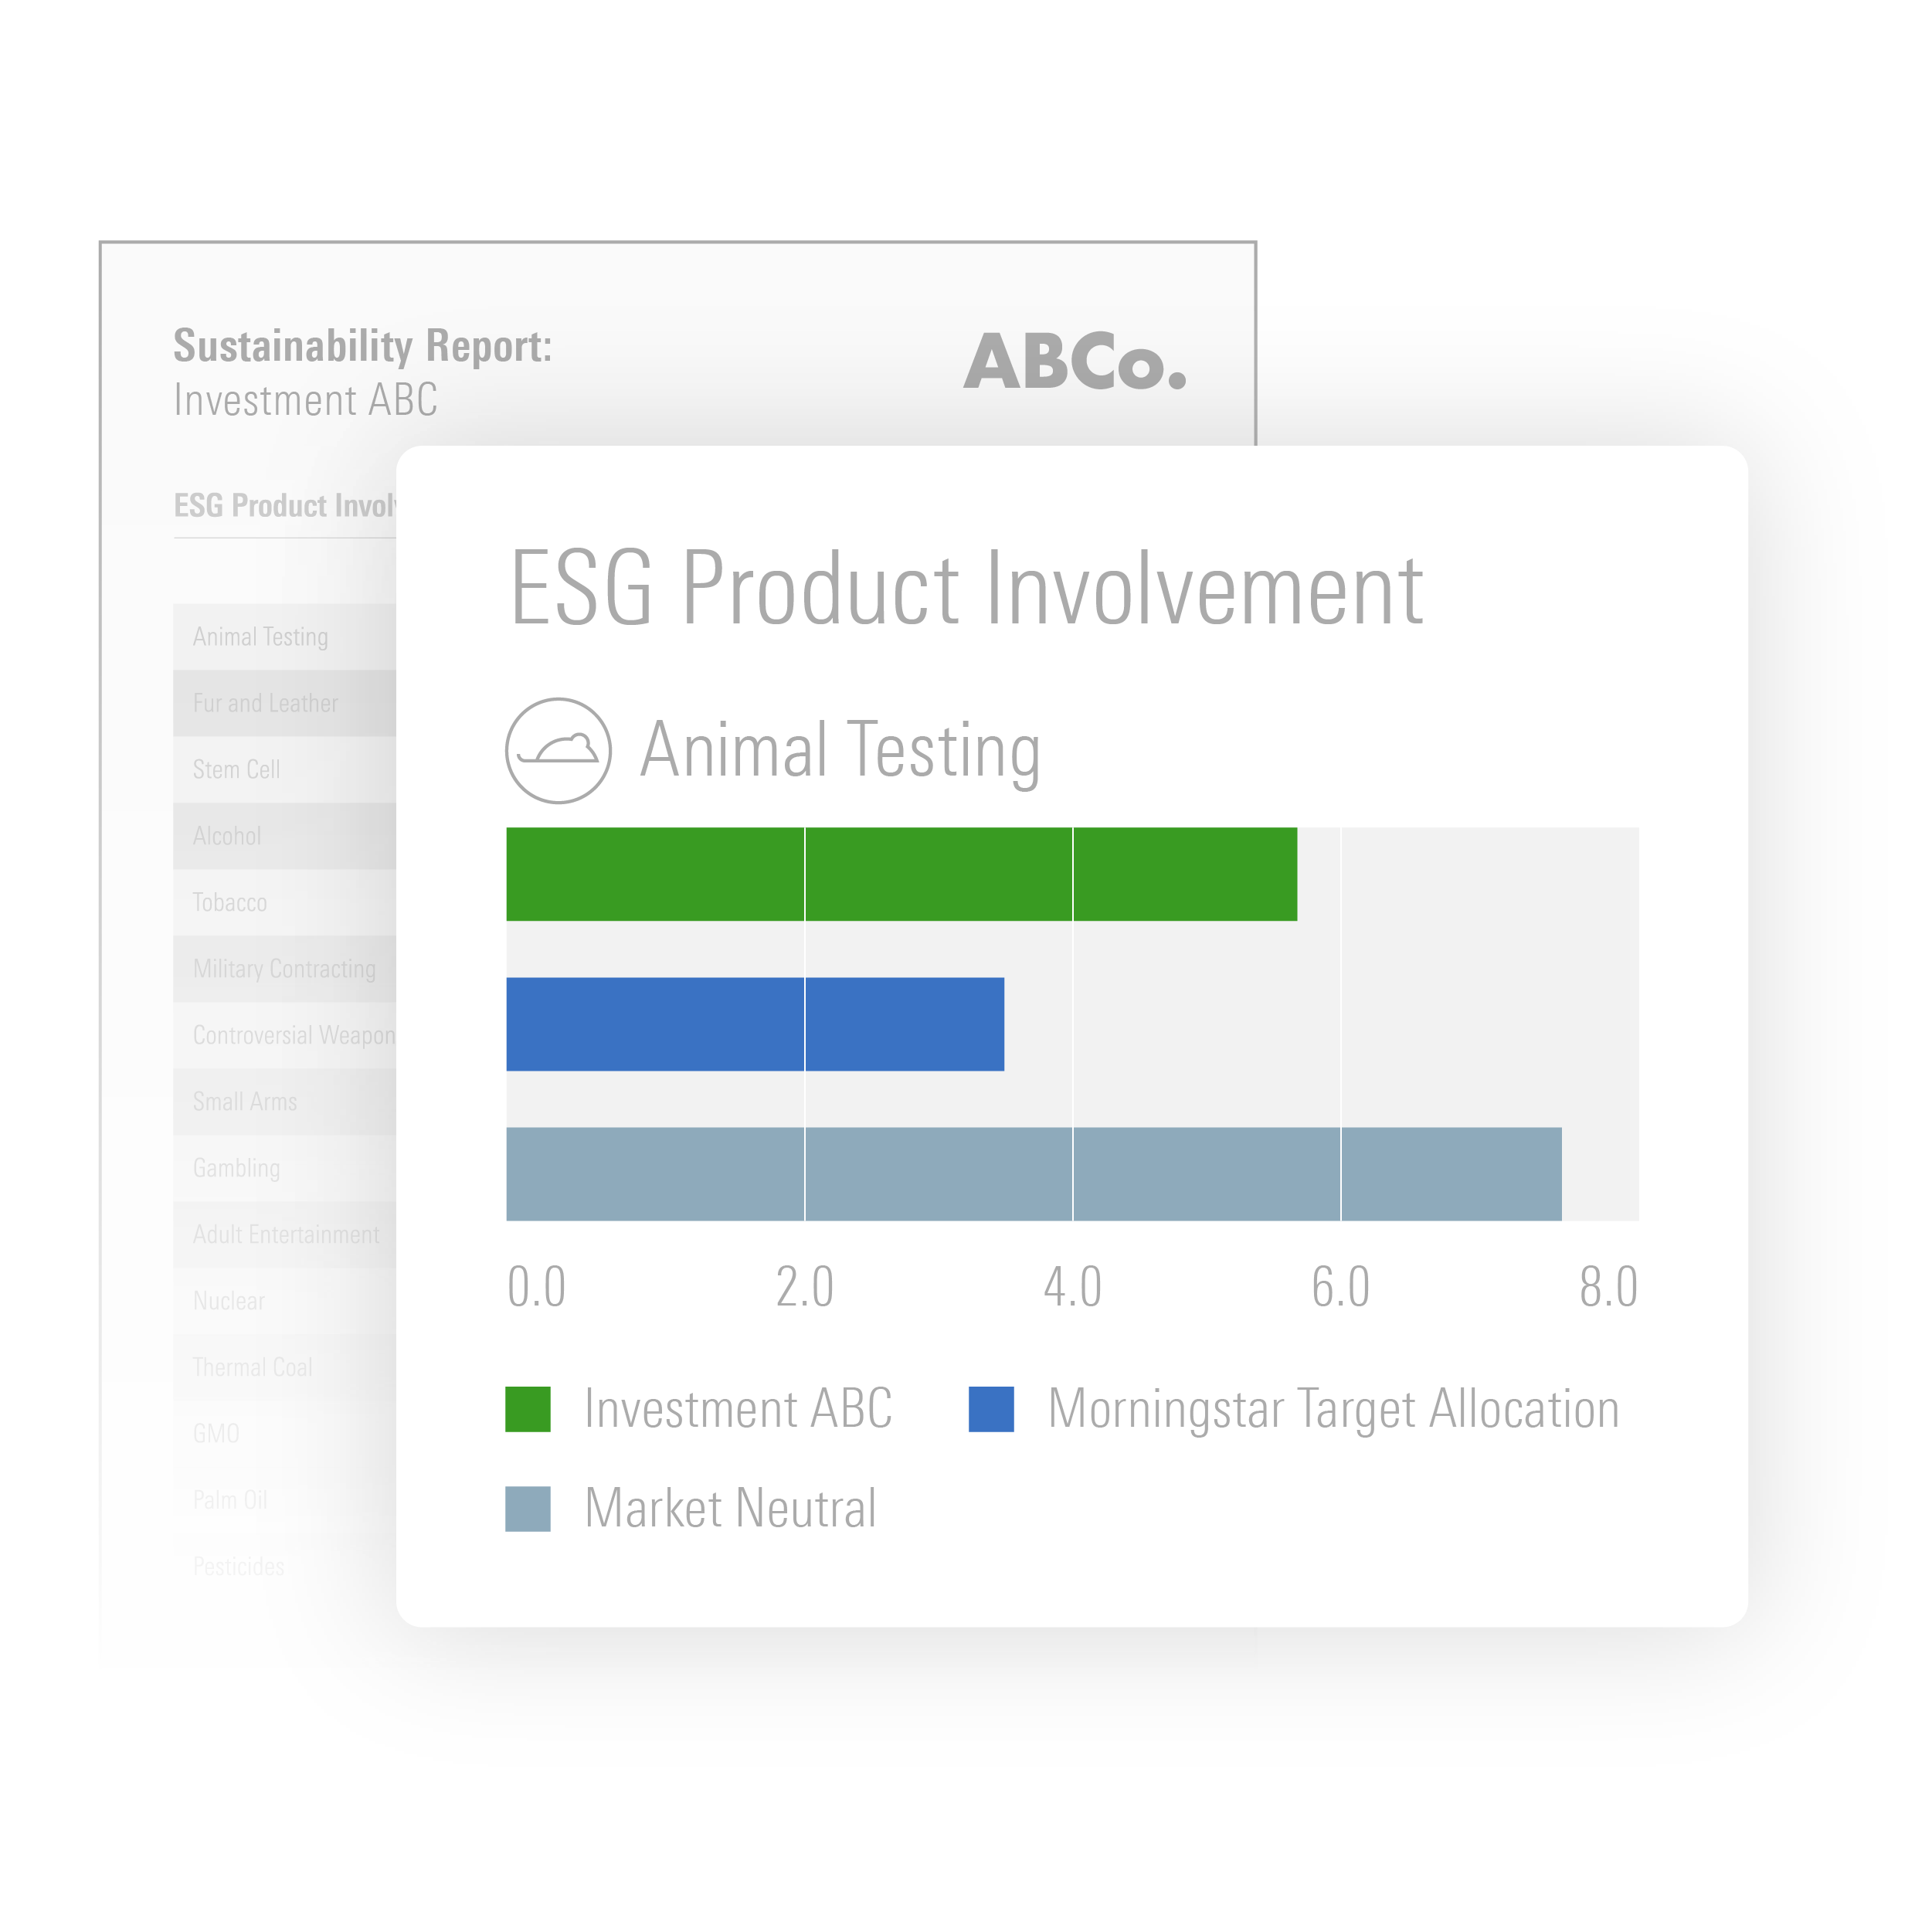 Illustrated detail of ESG Product Involvement from Sustainability Report 